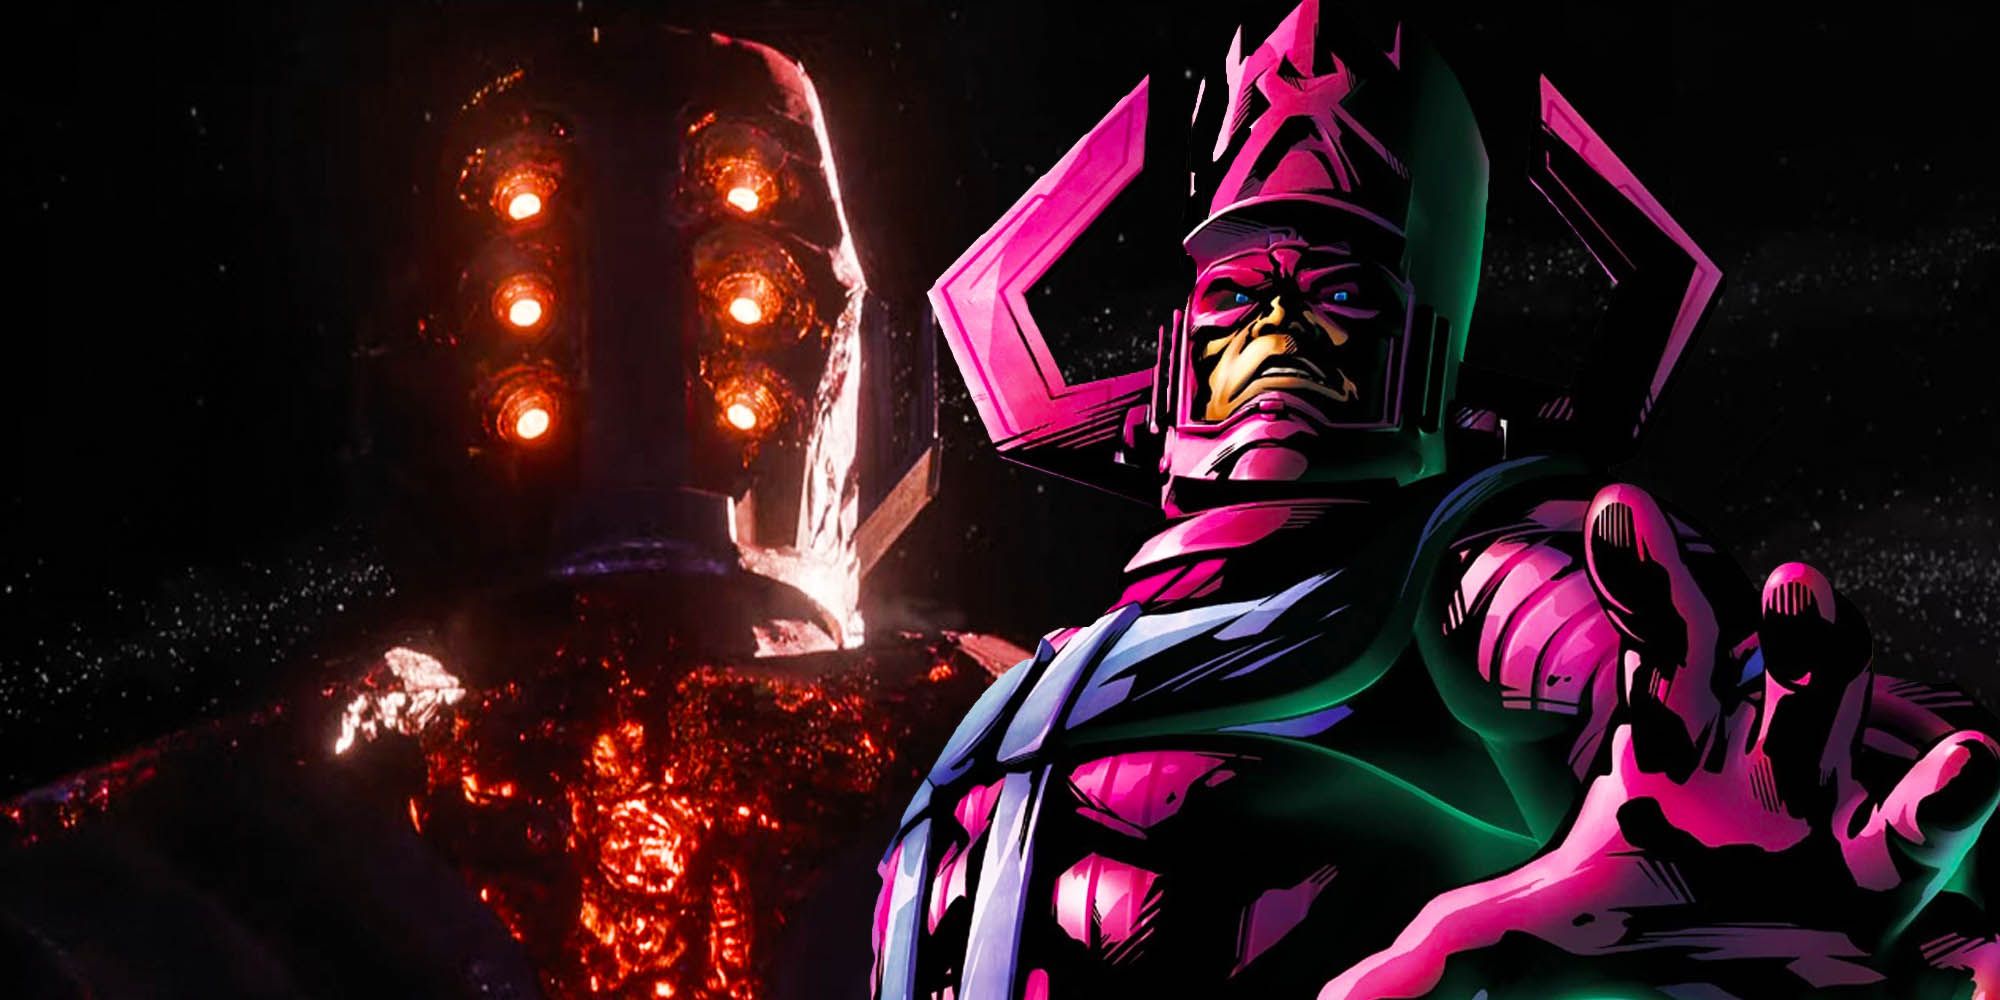 6. Galactus A guy named Galan is the sole survivor of the sixth incarnation of the Multiverse. He was the villain from the Fantastic Four who came very close to destroying their world. With the inclusion of the Fantastic Four with the MCU, Galactus might come back as well and could already be on his way.